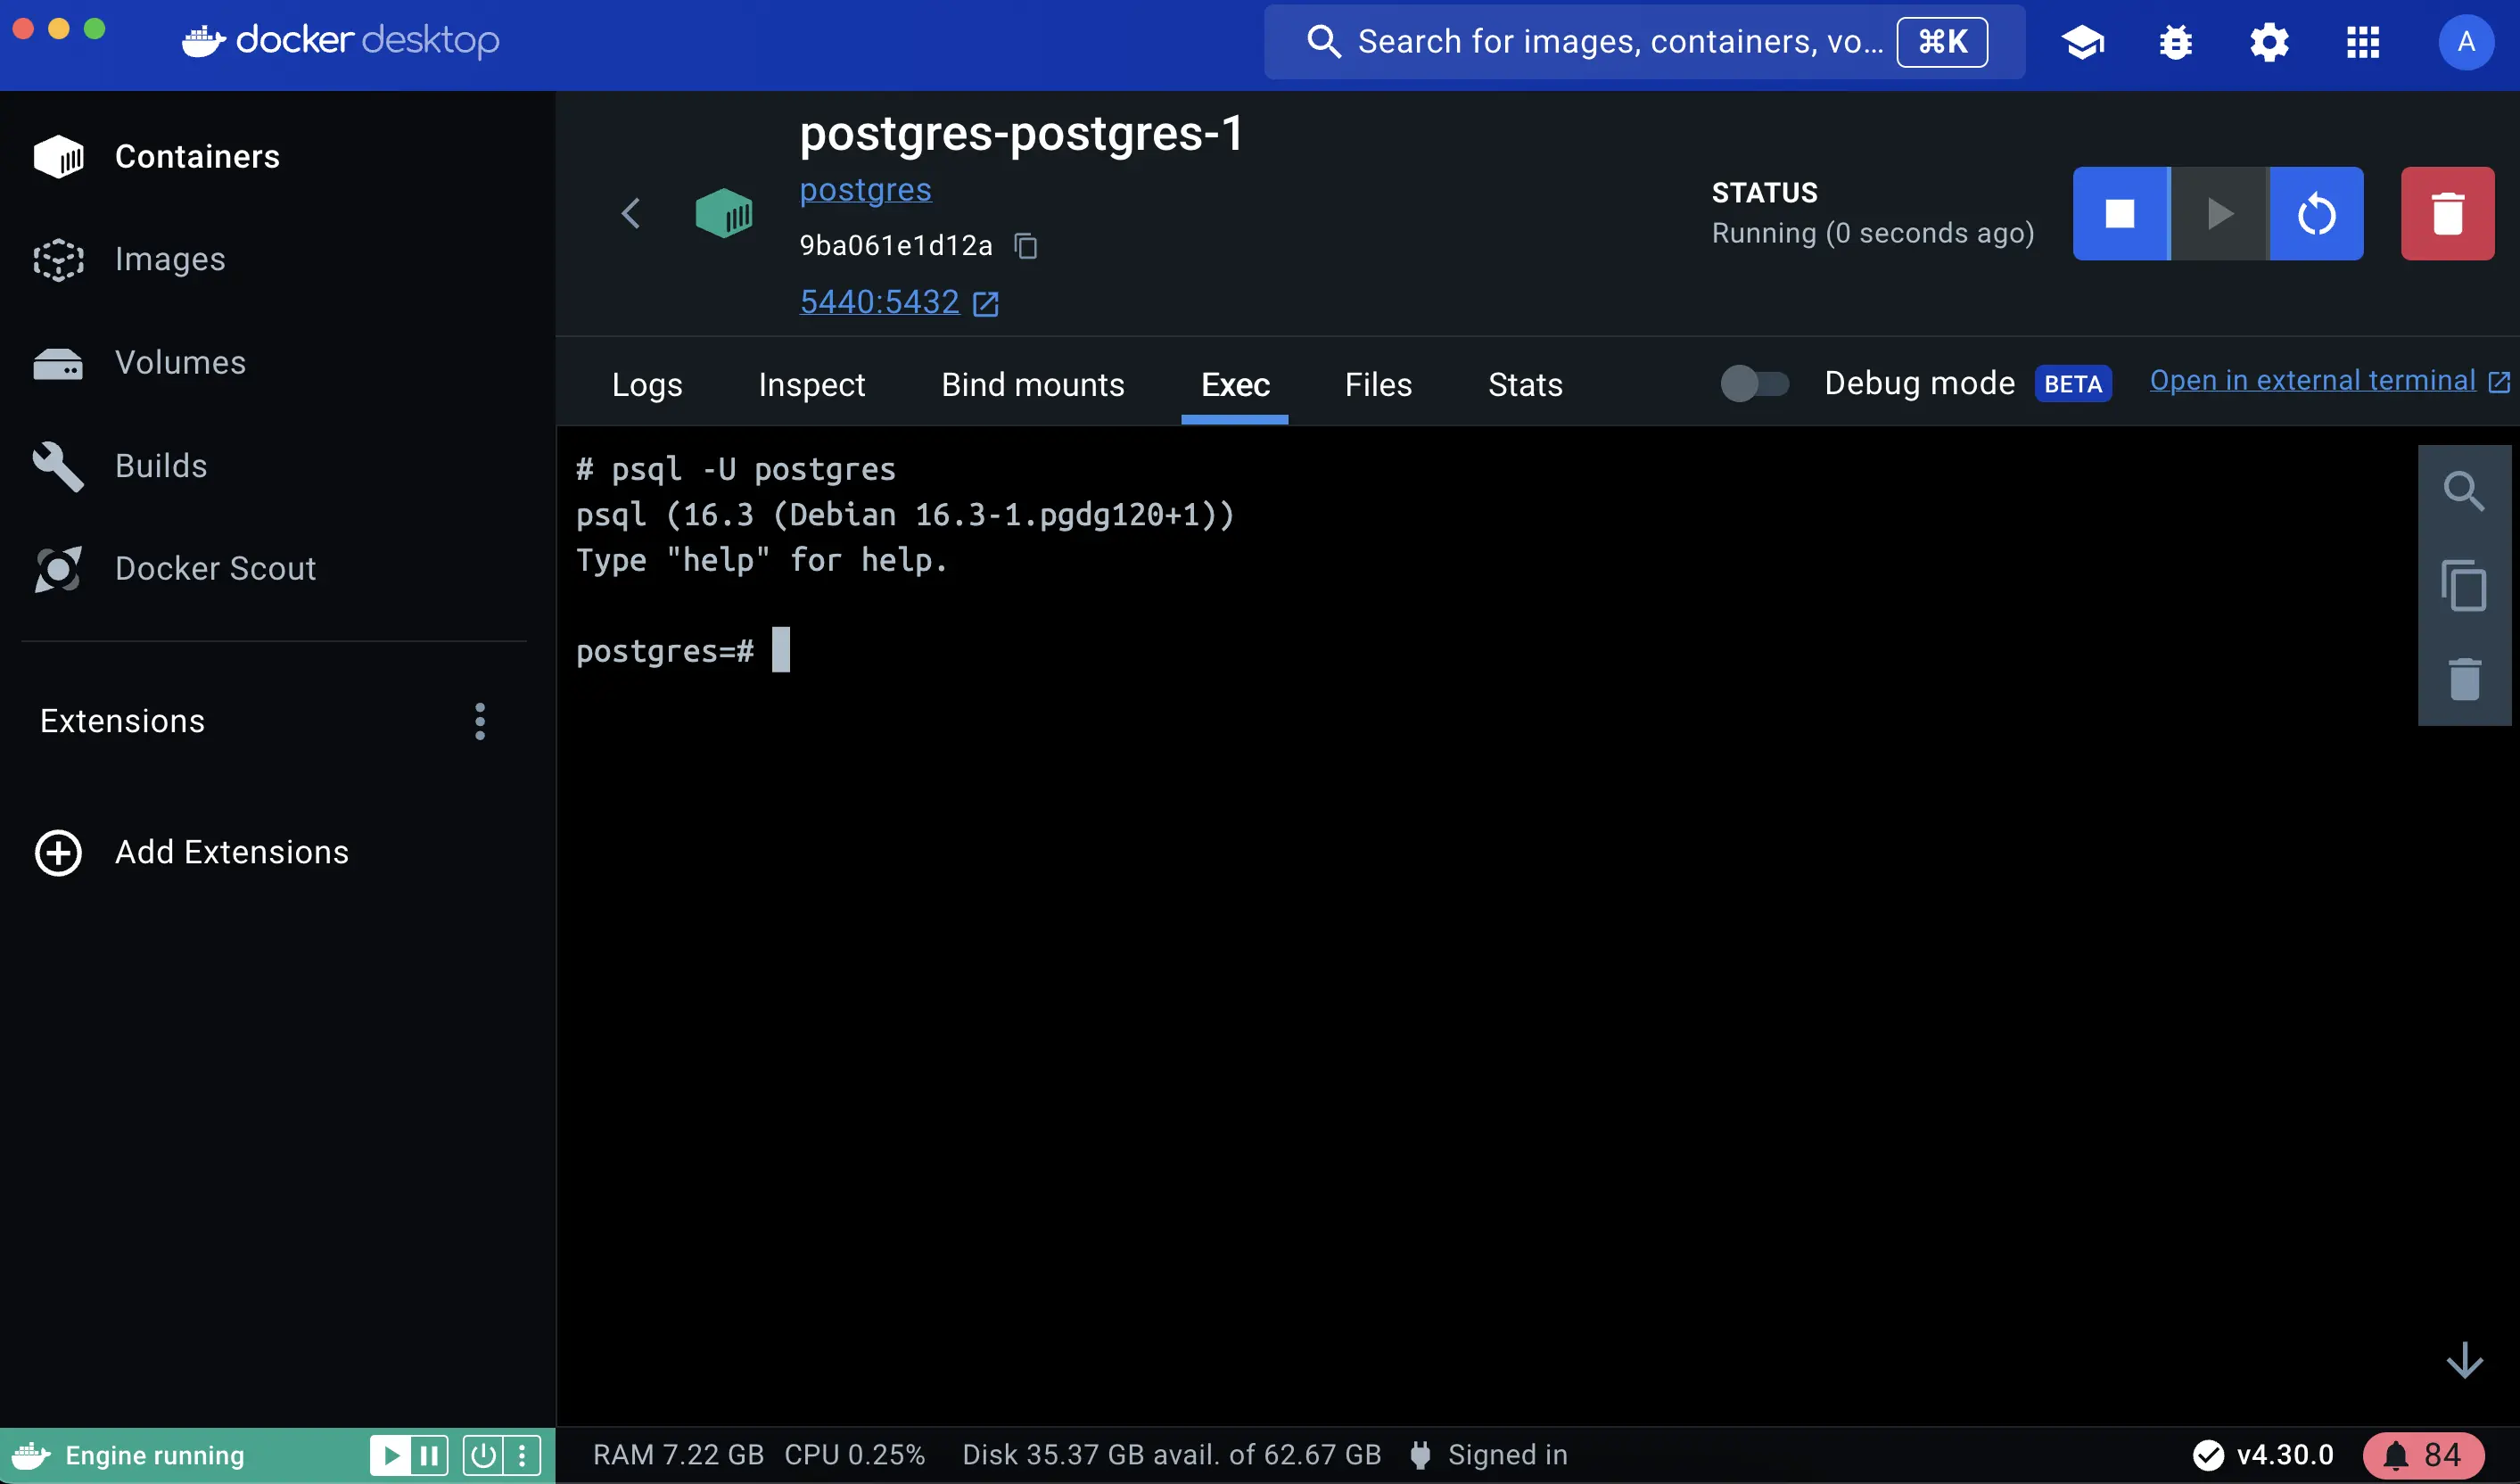 A screenshot of the Docker Dashboard selecting the Postgres container and entering into its shell using EXEC button